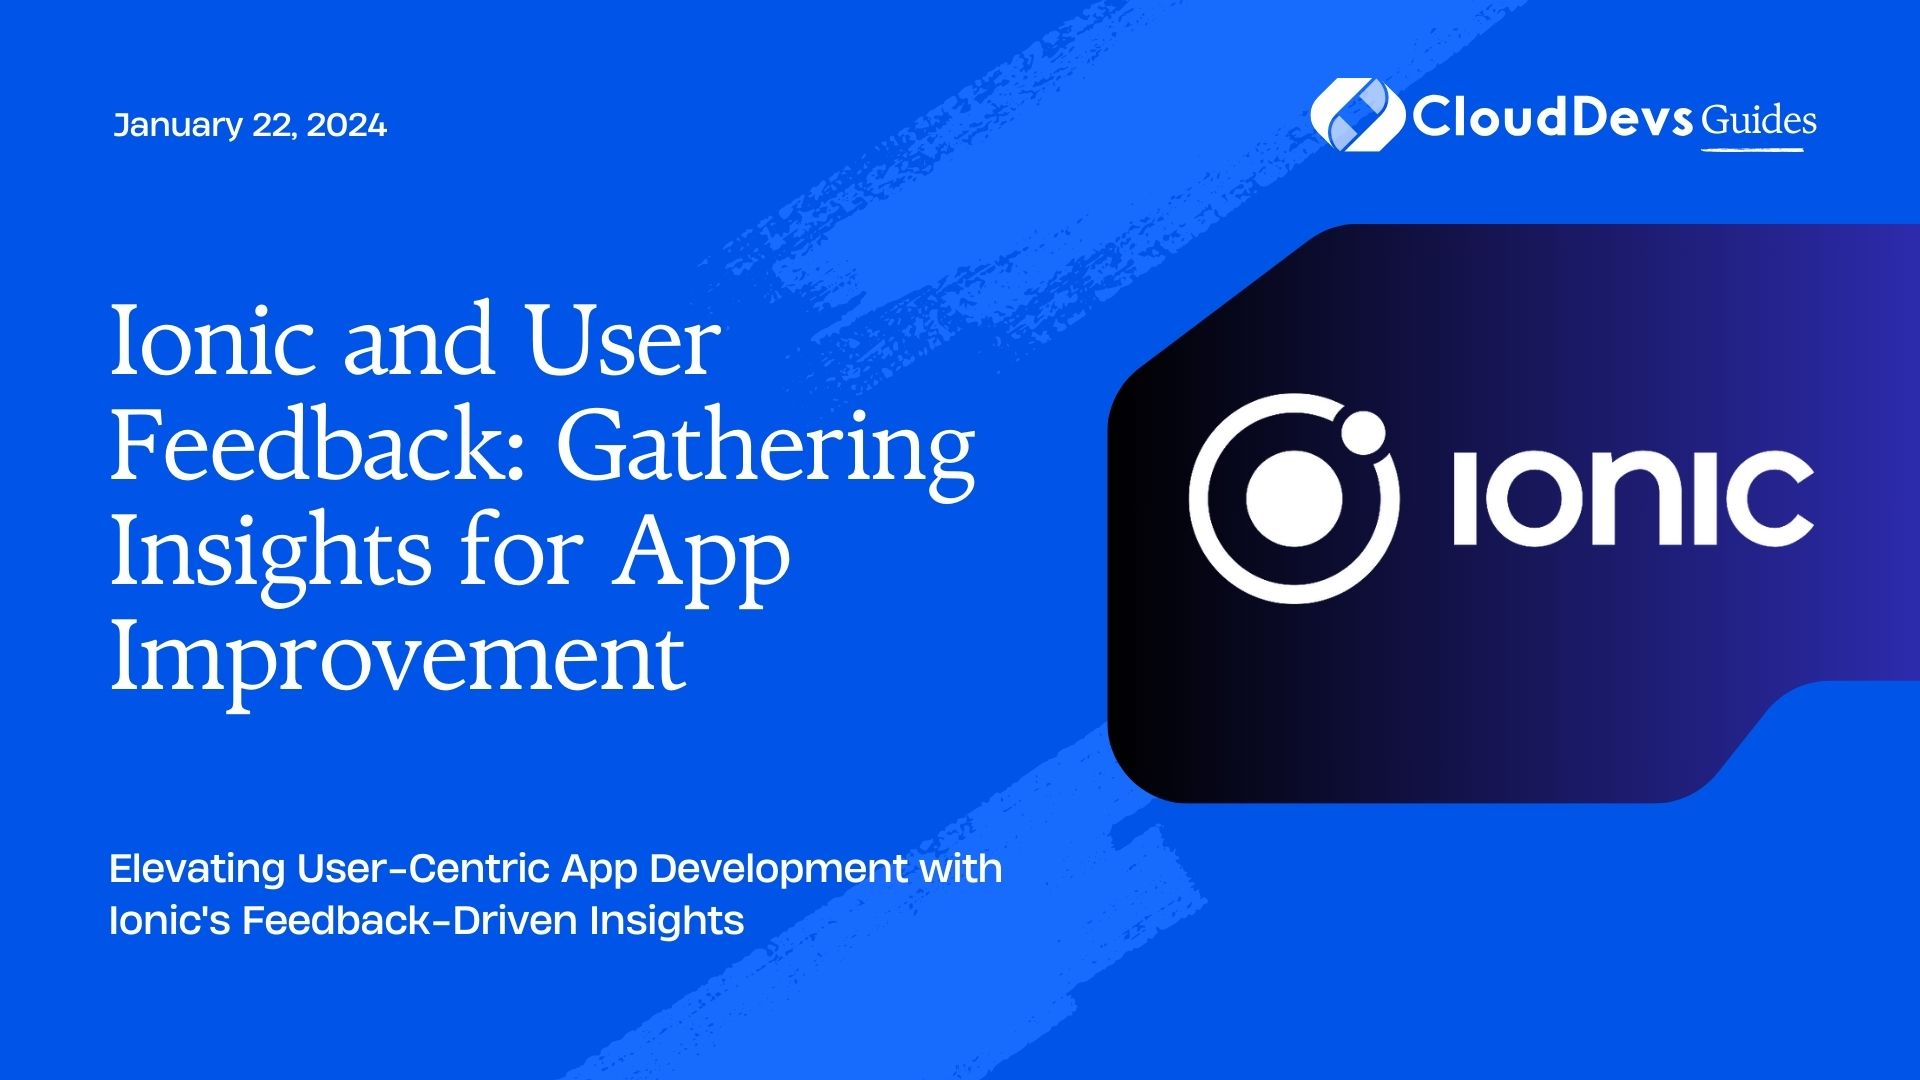 Ionic and User Feedback: Gathering Insights for App Improvement